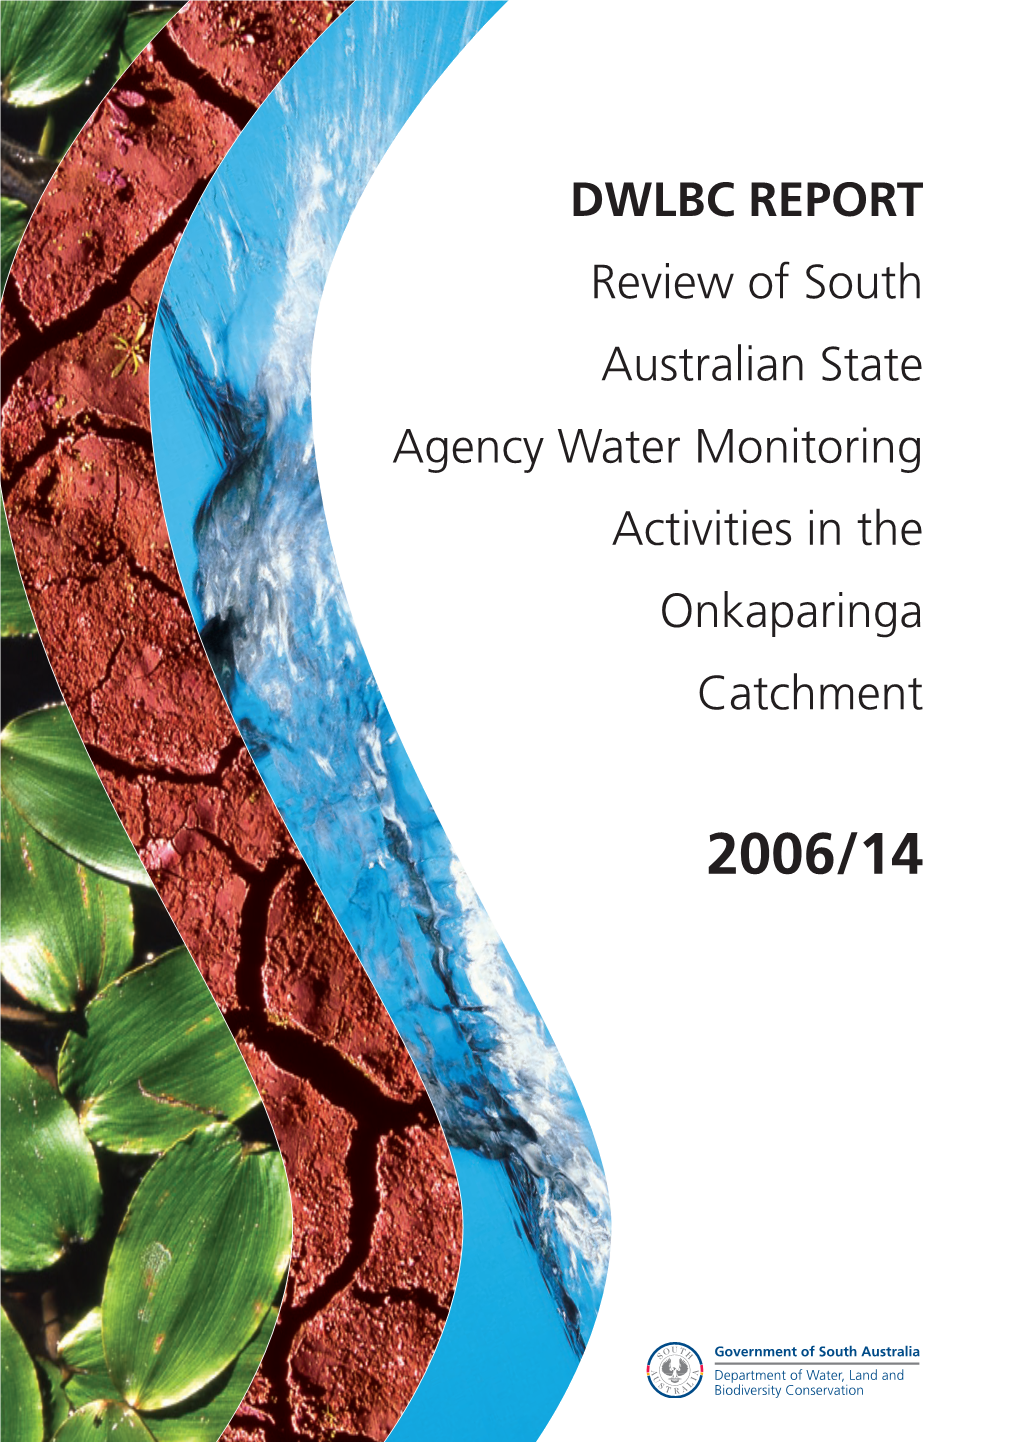 Review of South Australian State Agency Water Monitoring Activities in the Onkaparinga Catchment